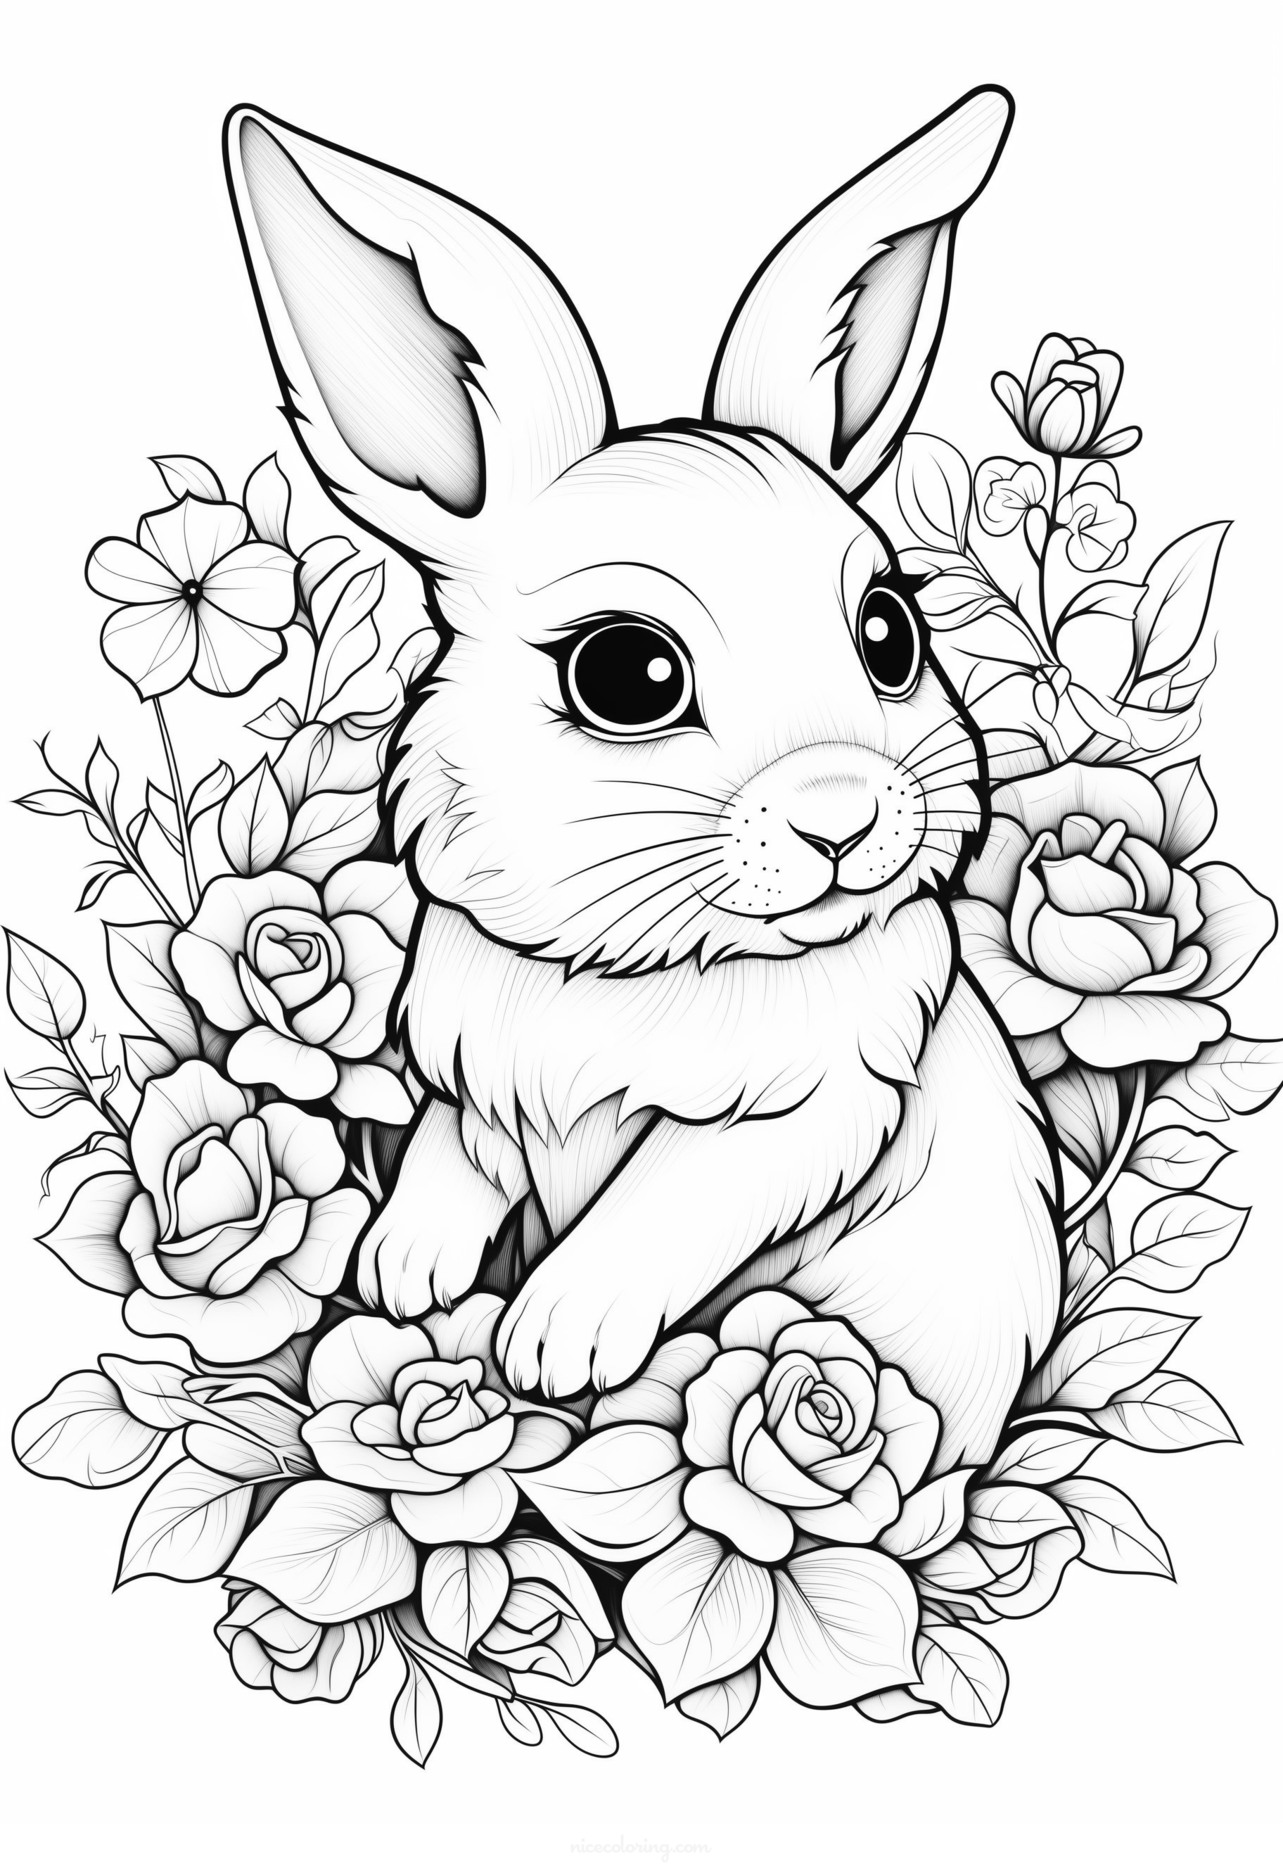 Rabbit in a grassy field coloring page